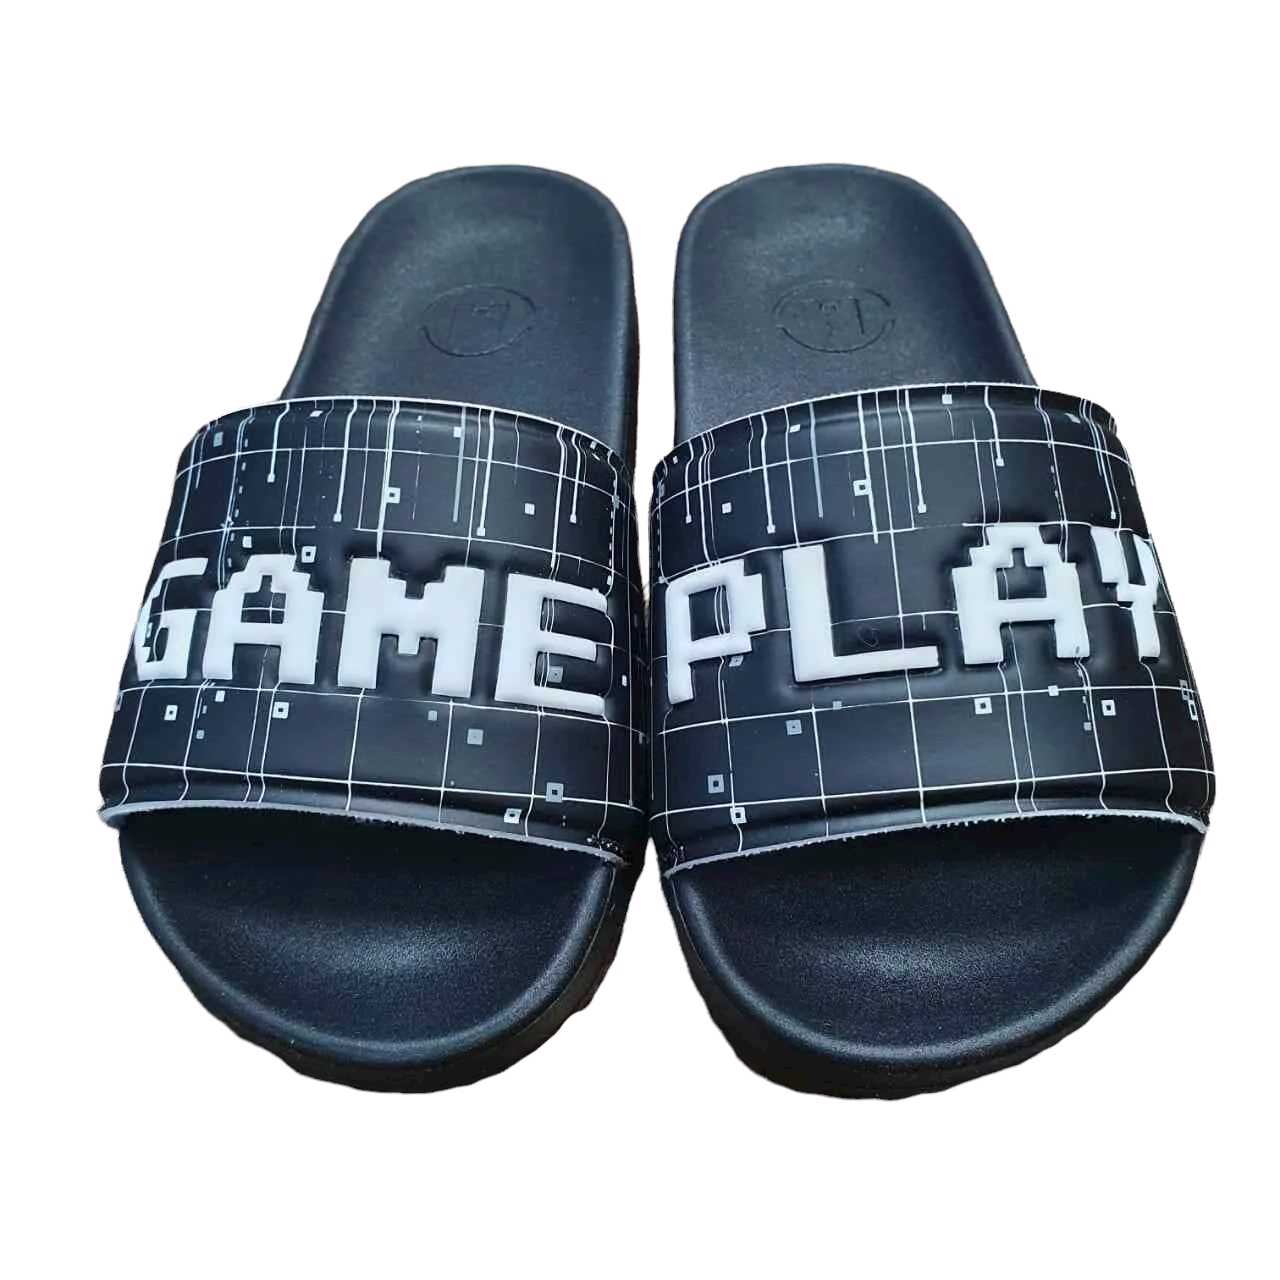 Chinelo Play Game Infantil